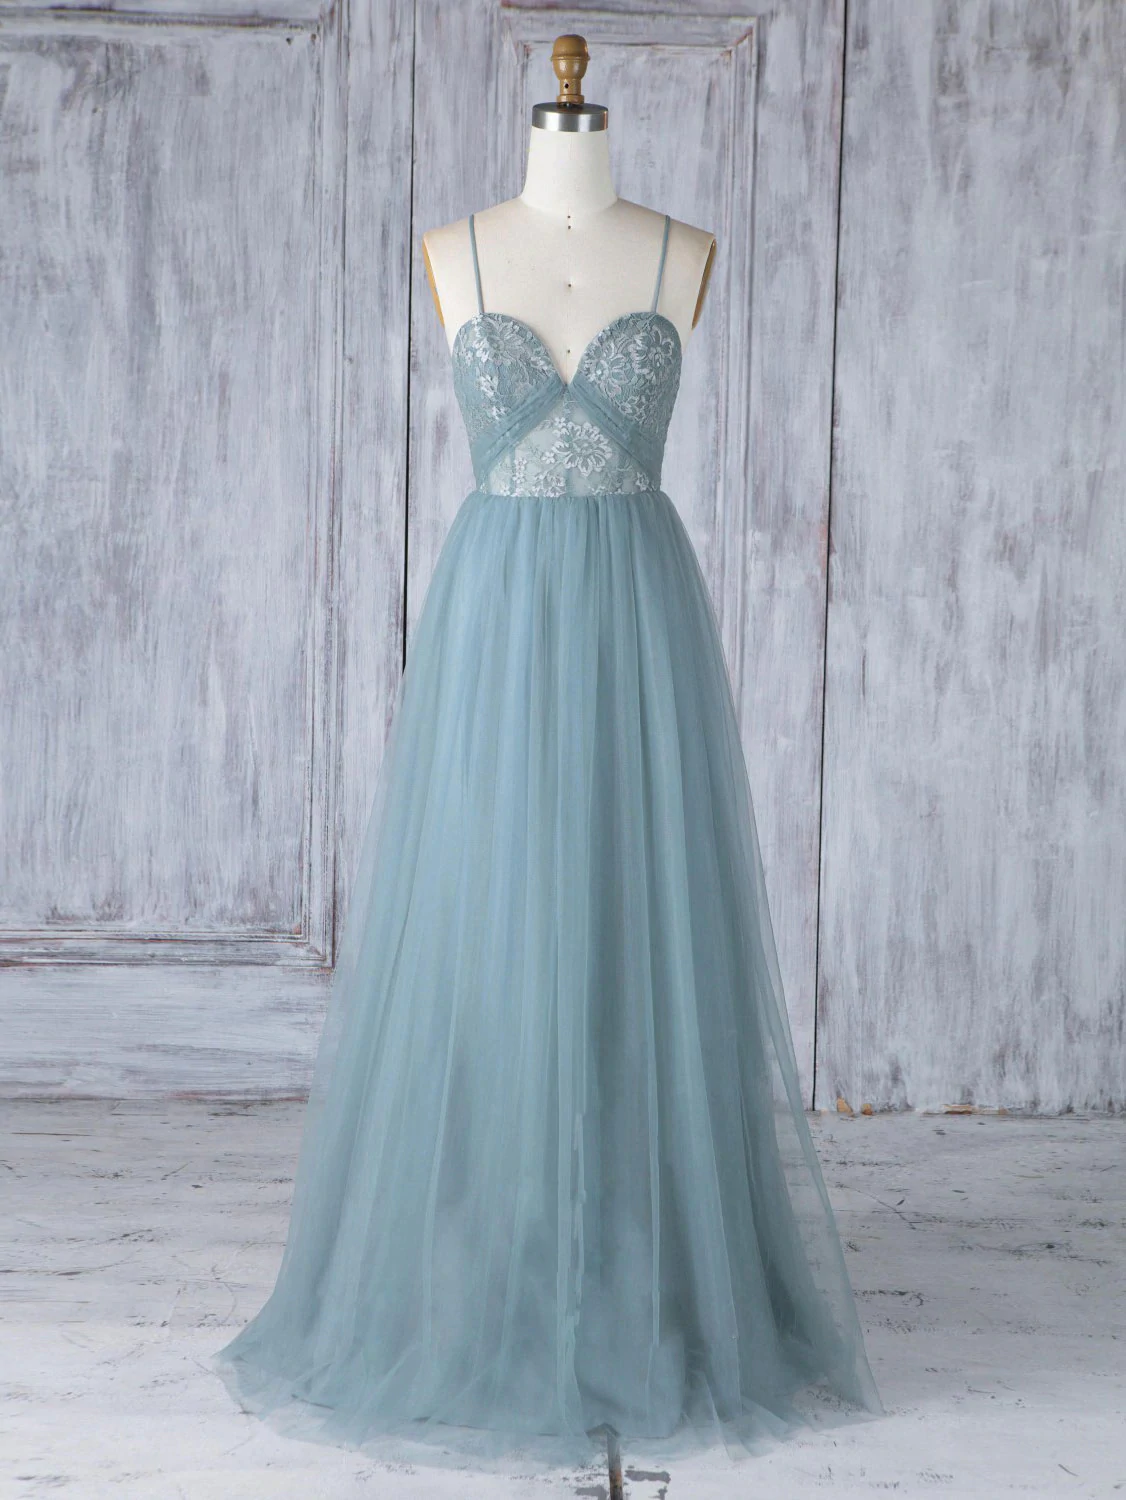 Elegant Simple Sweetheart Neck Tulle Lace Formal Prom Dress, Beautiful Prom Dress, Banquet Party Dress